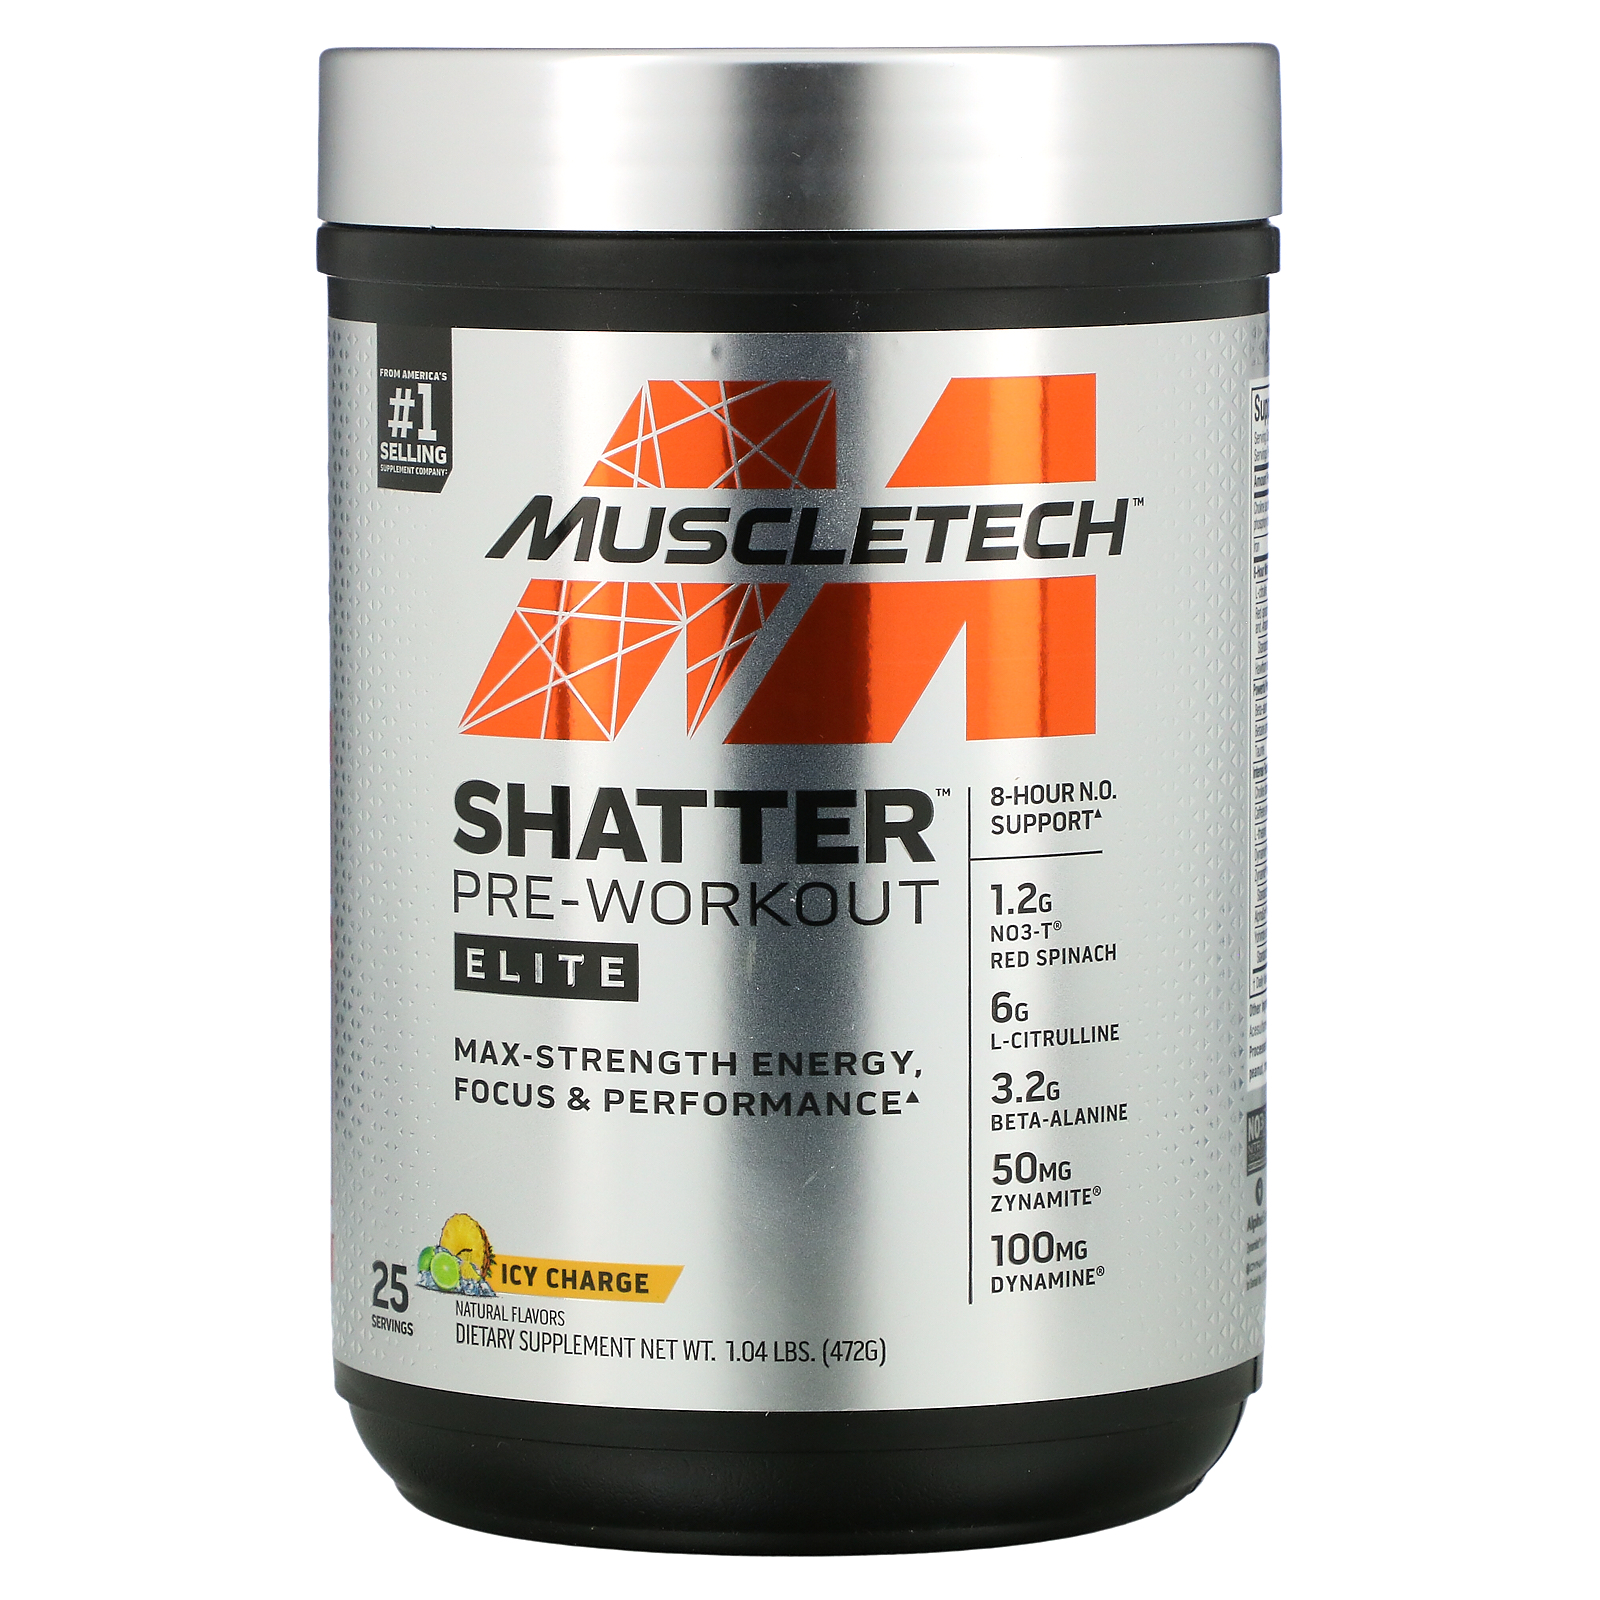 Simple Muscletech Pre Workout Shatter Review for Gym